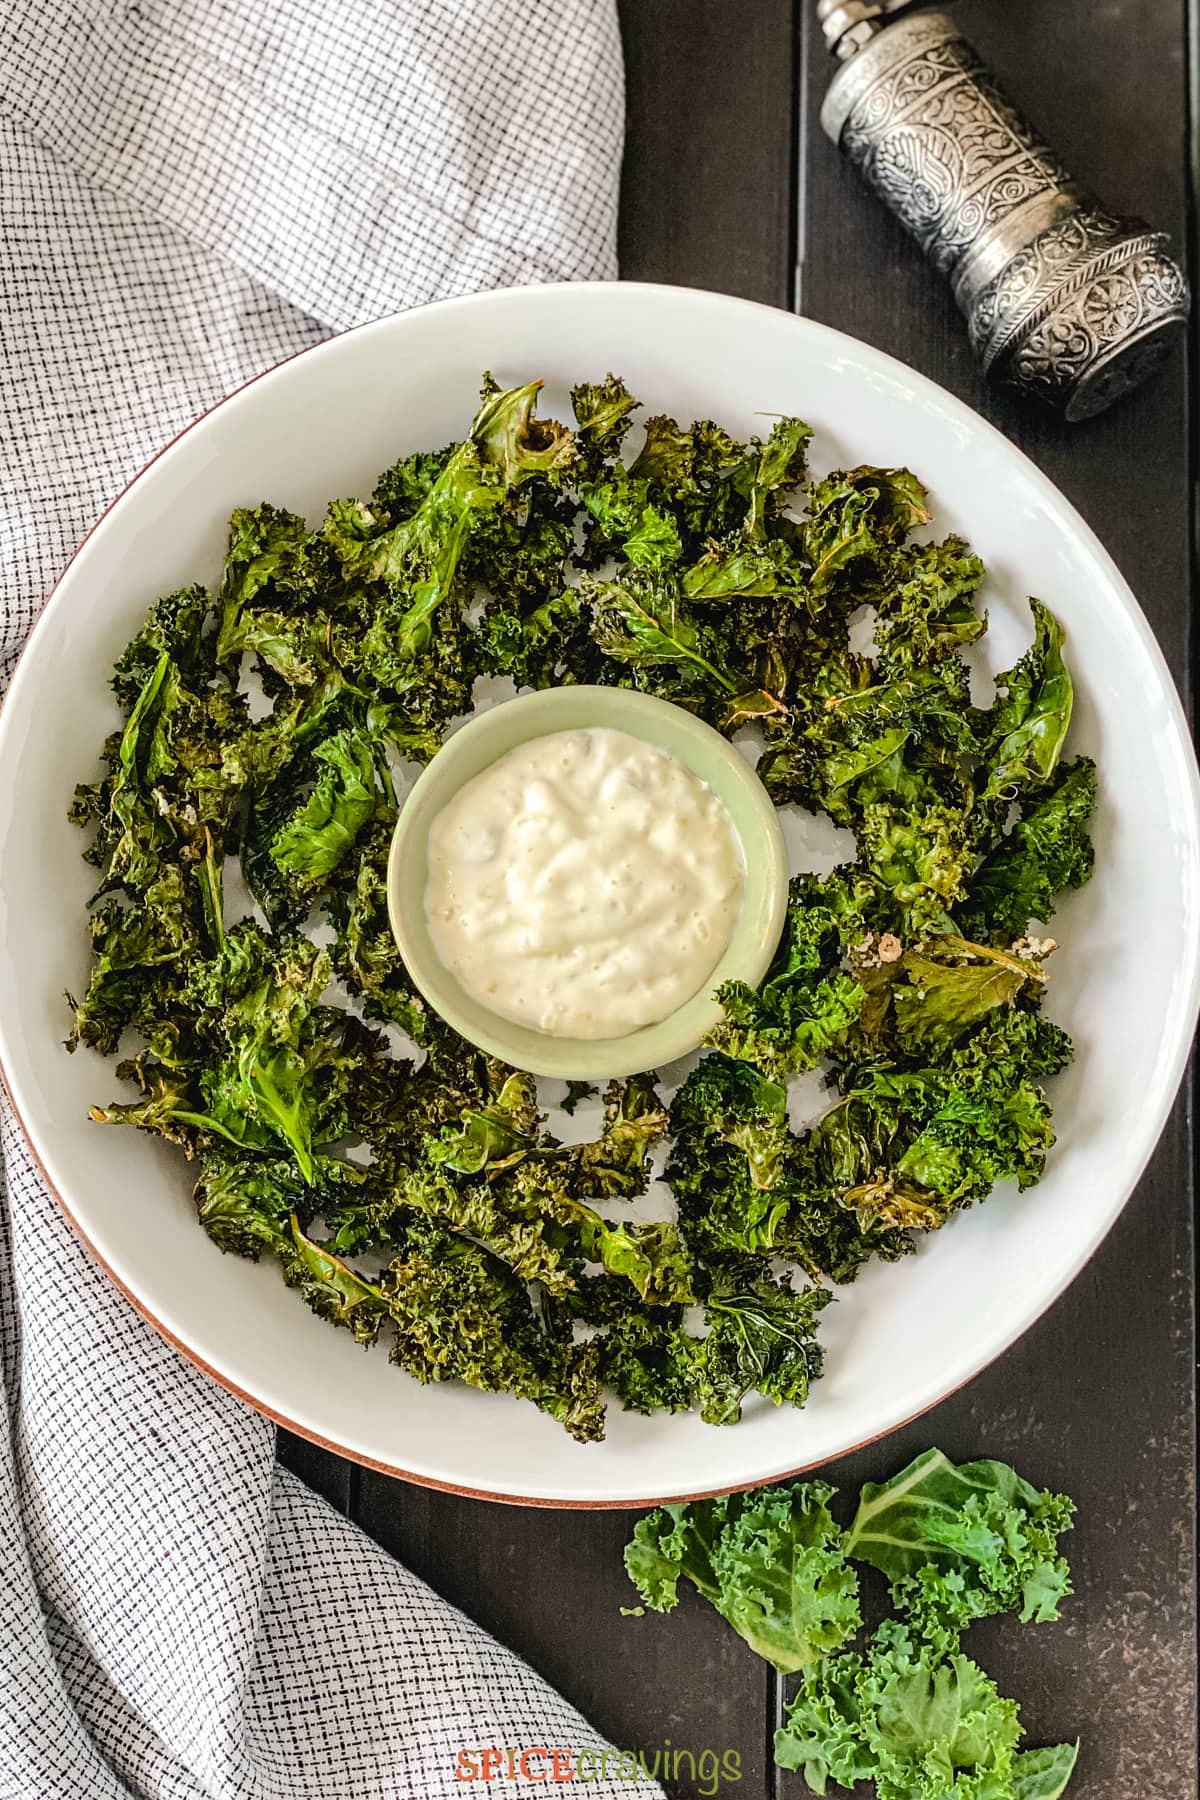 Kale chips in white bowl with lemon sauce in middle